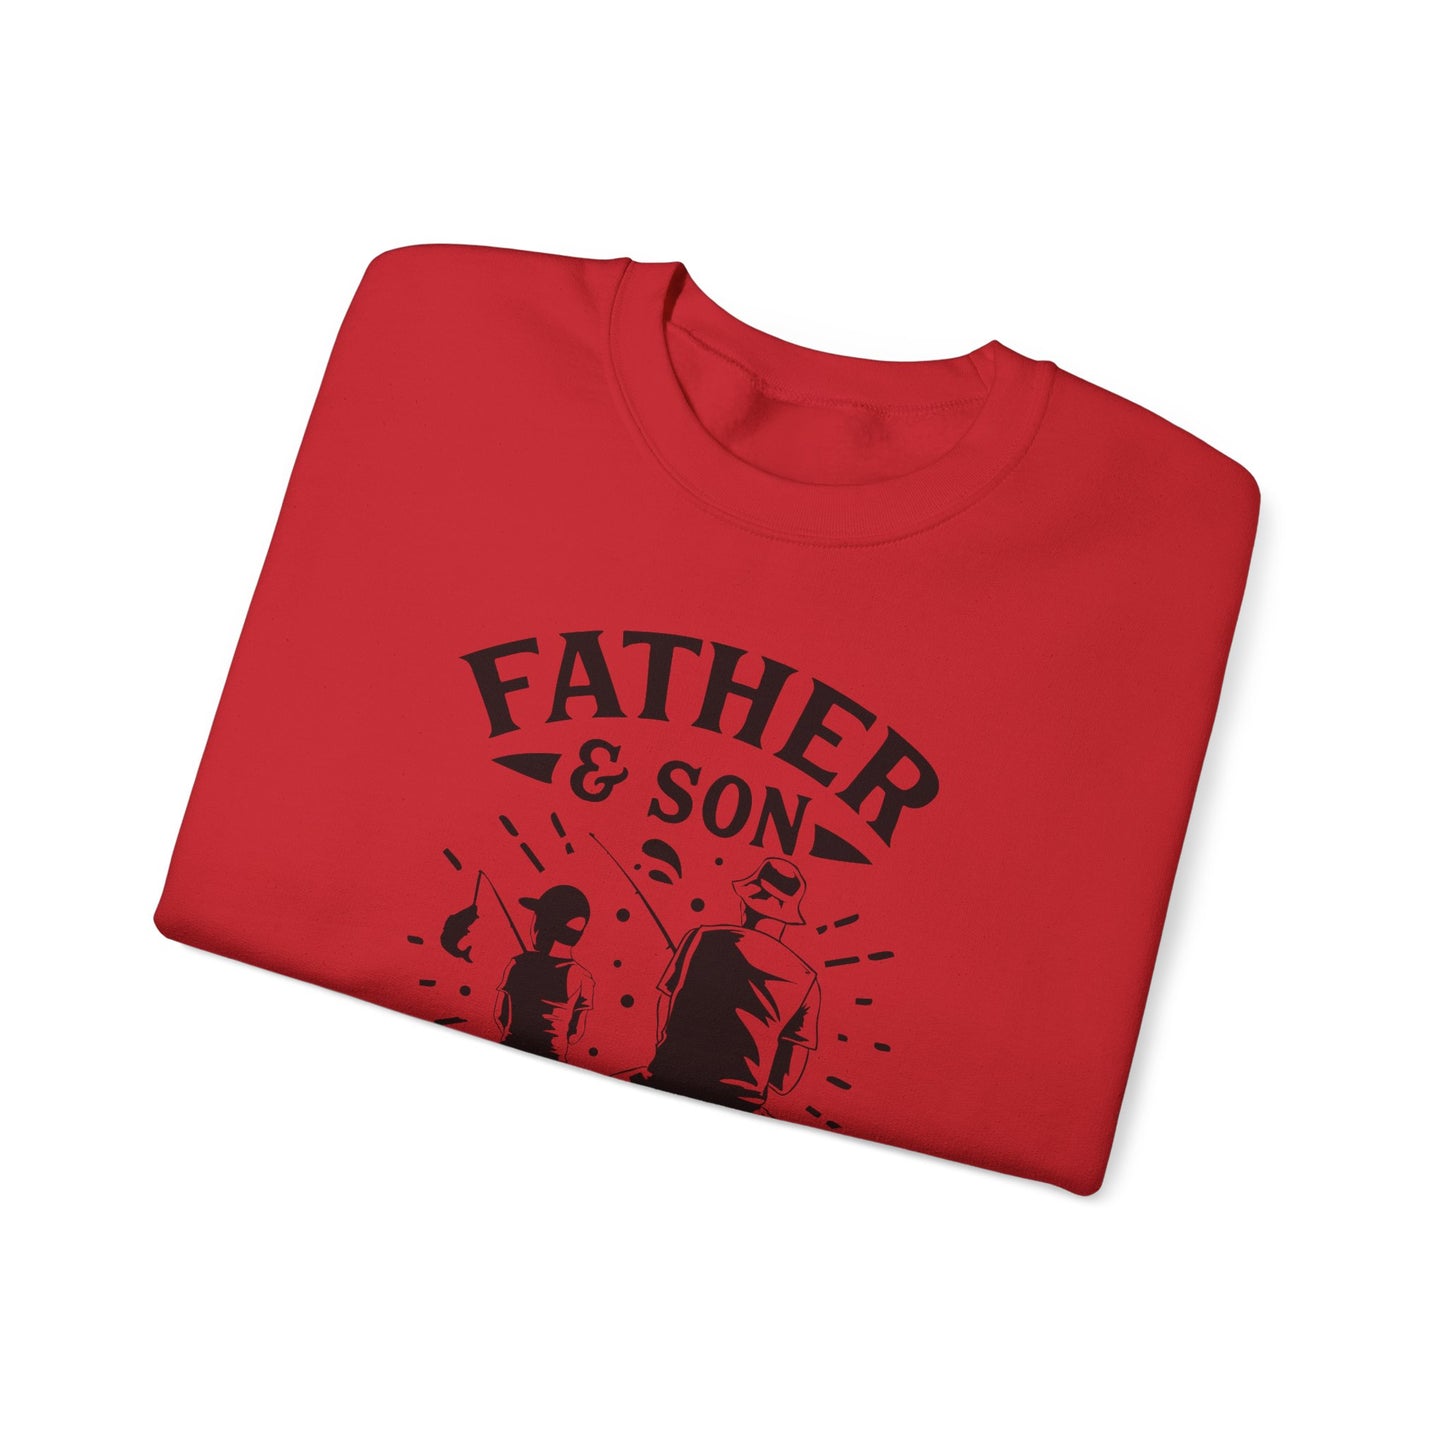 Father and son for life - Unisex Heavy Blend™ Crewneck Sweatshirt